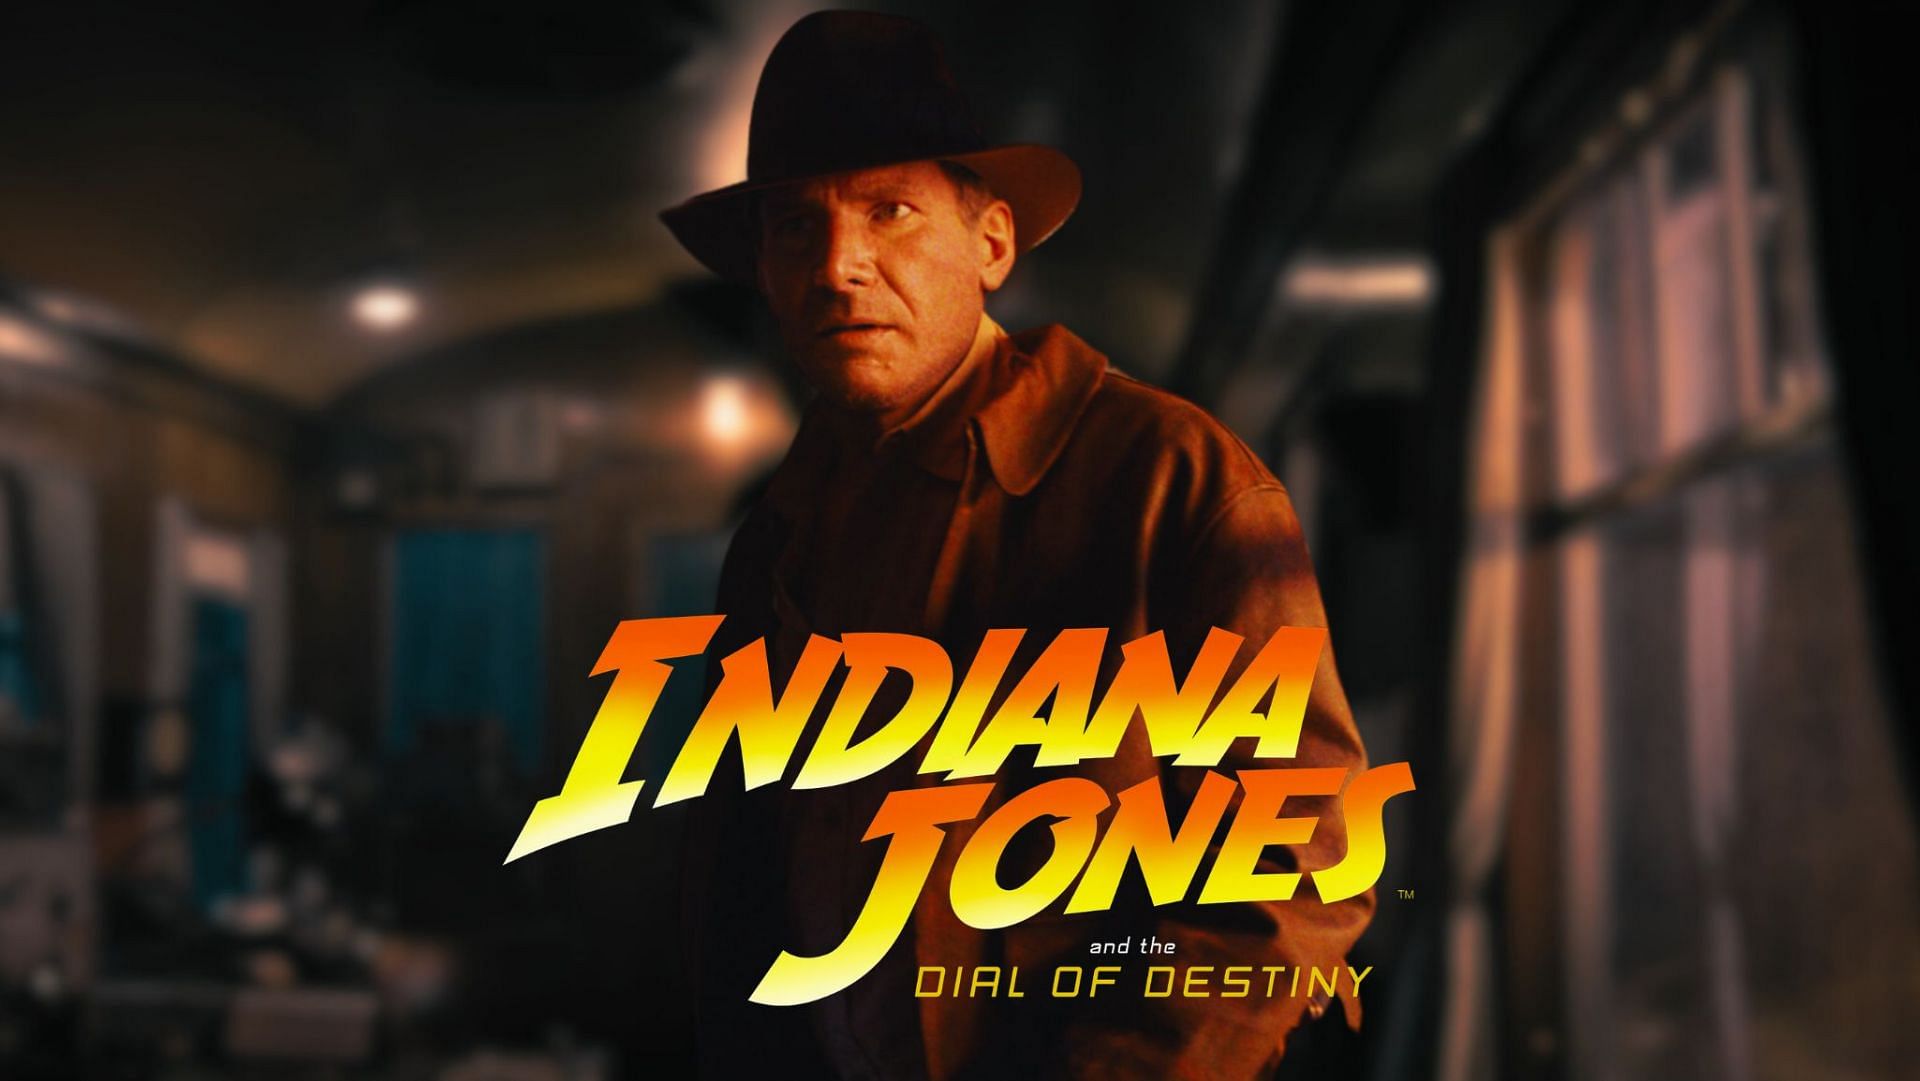 Indiana Jones 5: First Reviews From Cannes Film Festival